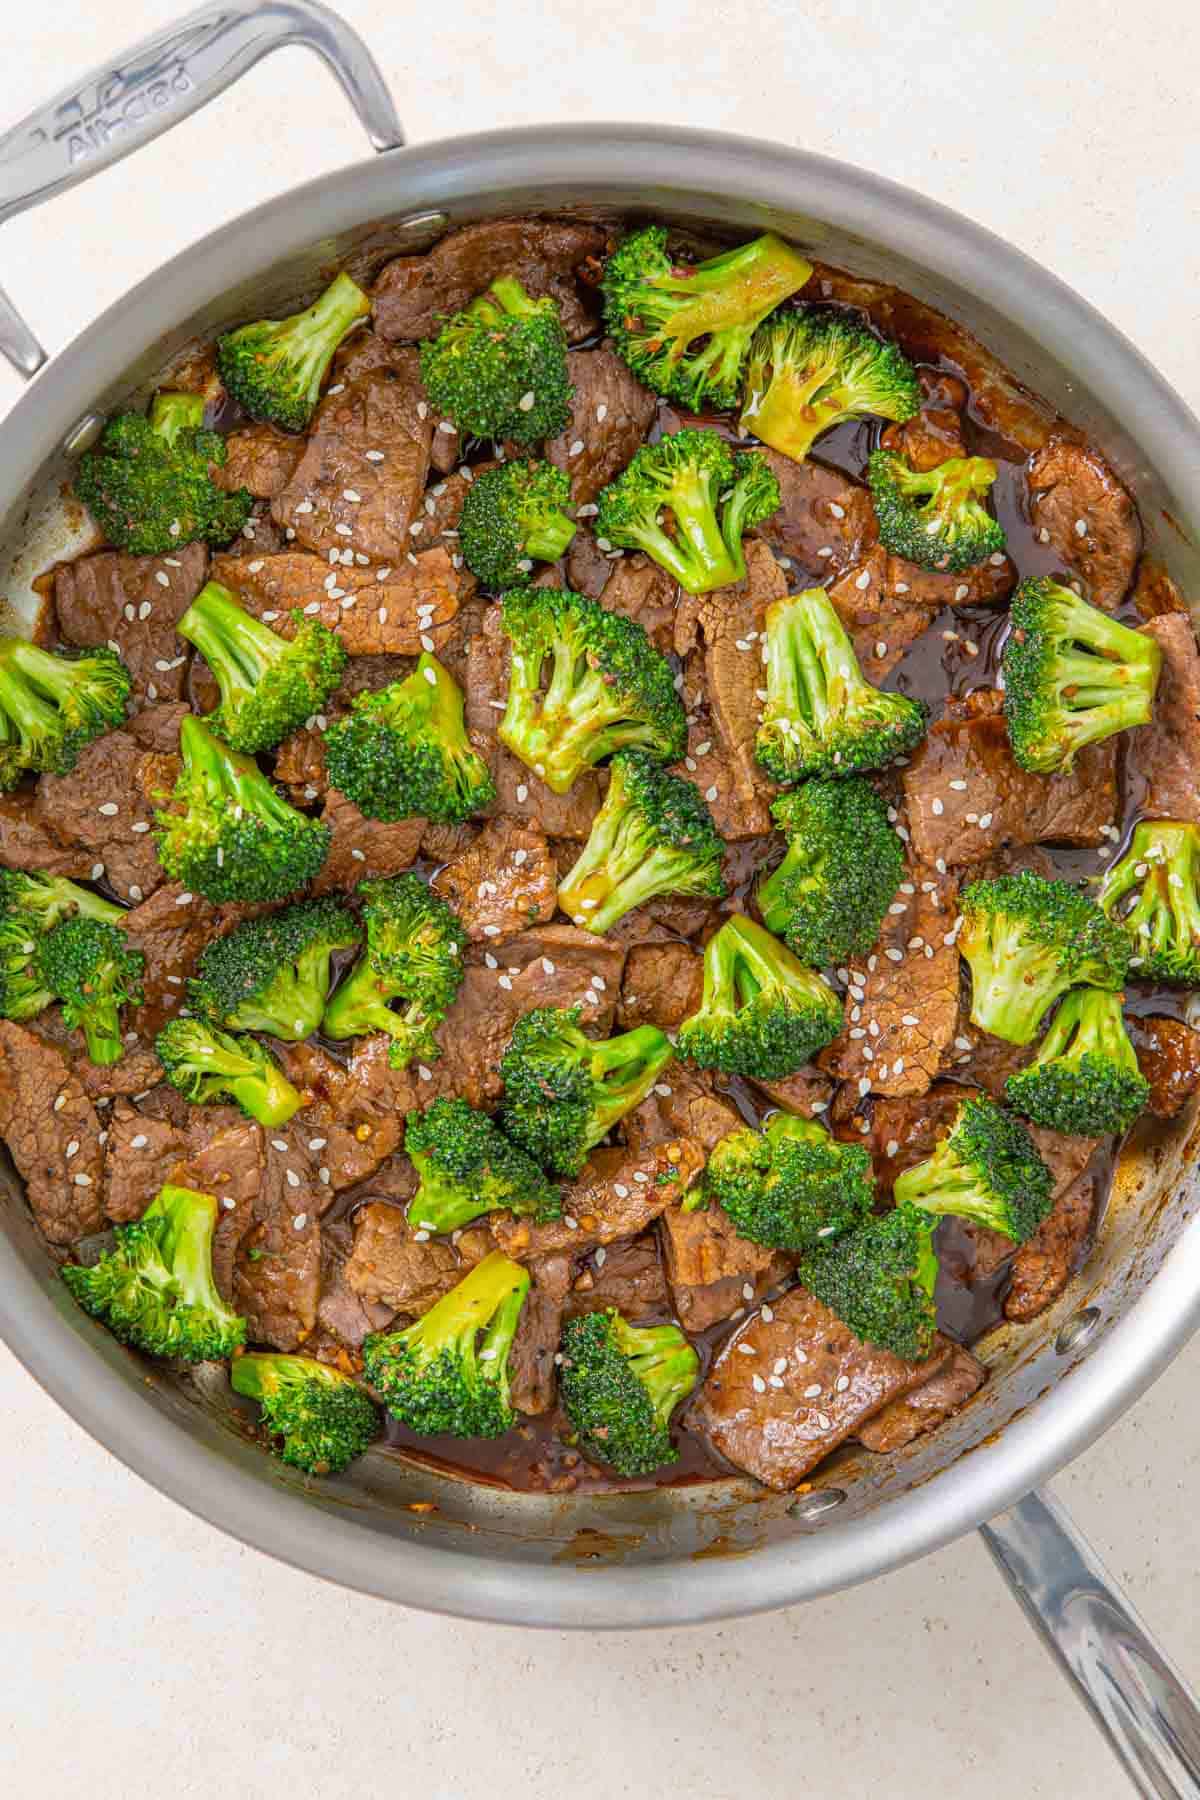 Overhead view of beef and broccoli in a sauté pan.